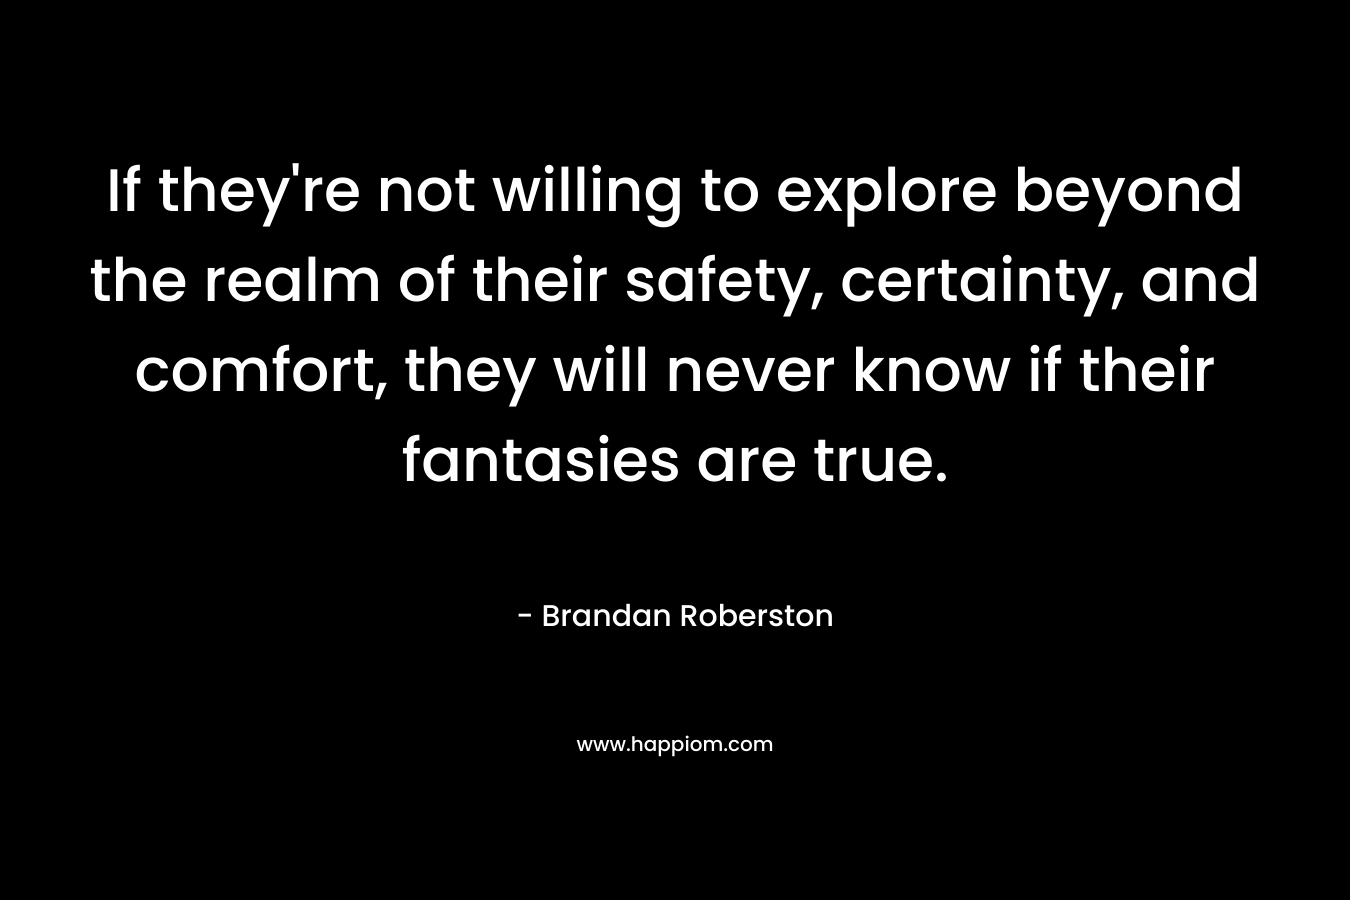 If they’re not willing to explore beyond the realm of their safety, certainty, and comfort, they will never know if their fantasies are true. – Brandan Roberston